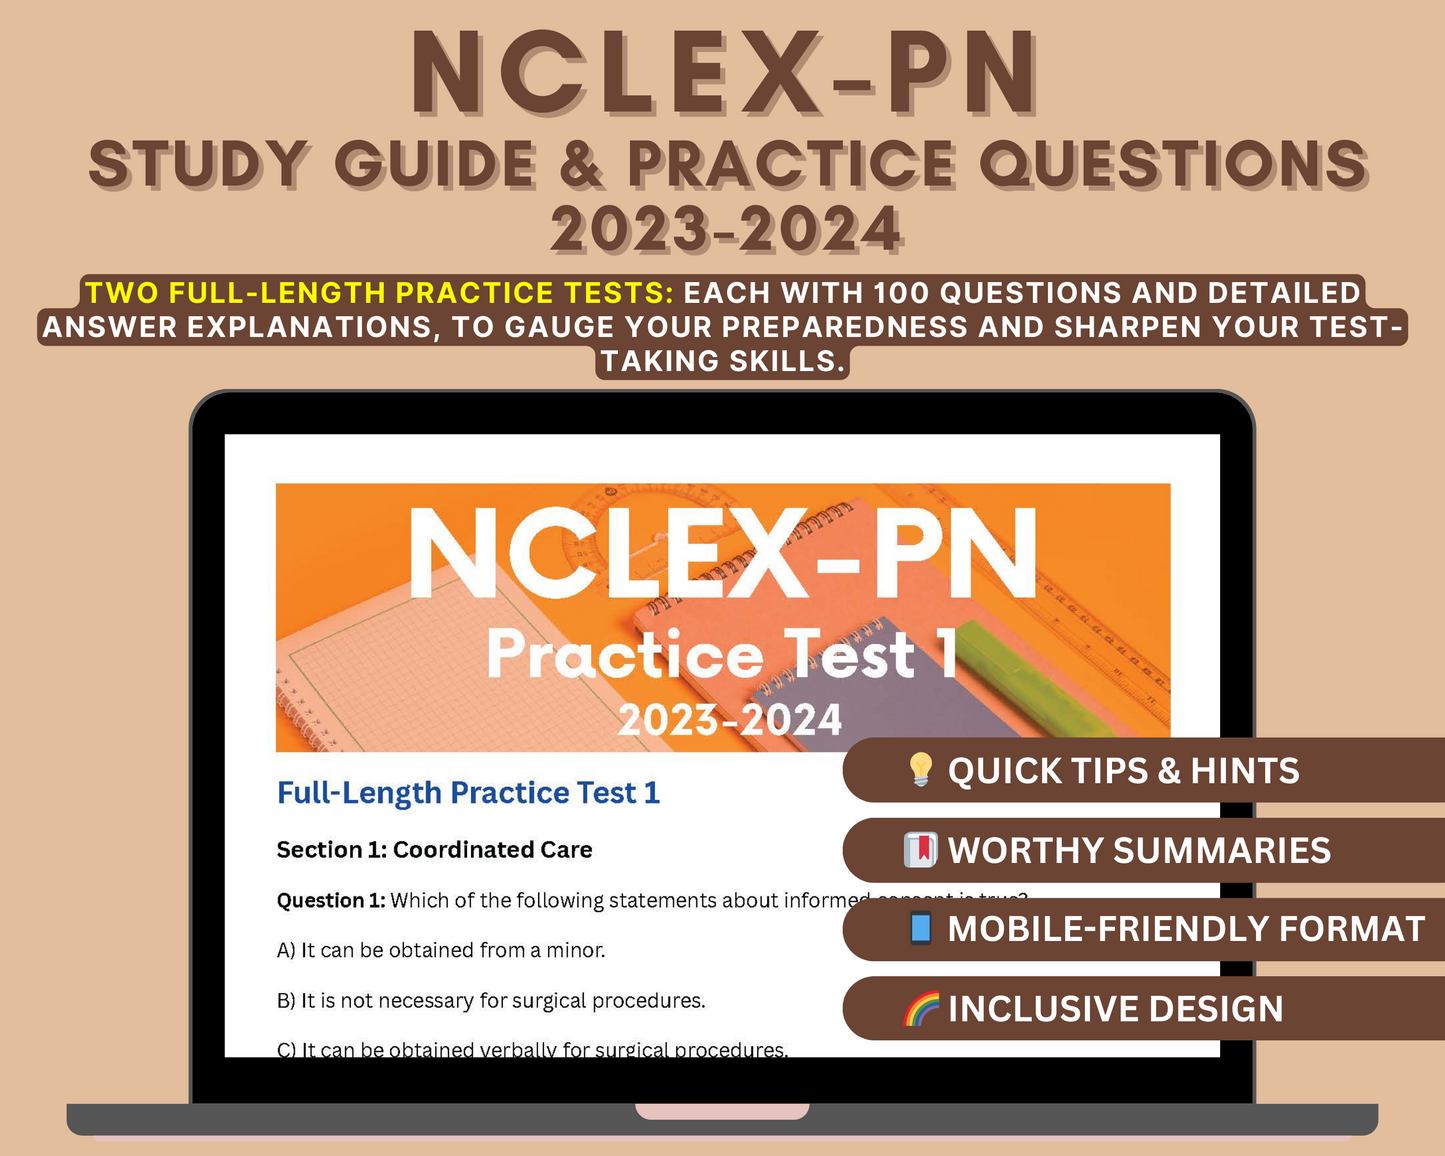 NCLEX-PN Mastery Guide 2023-2024: Your Path to Nursing Success